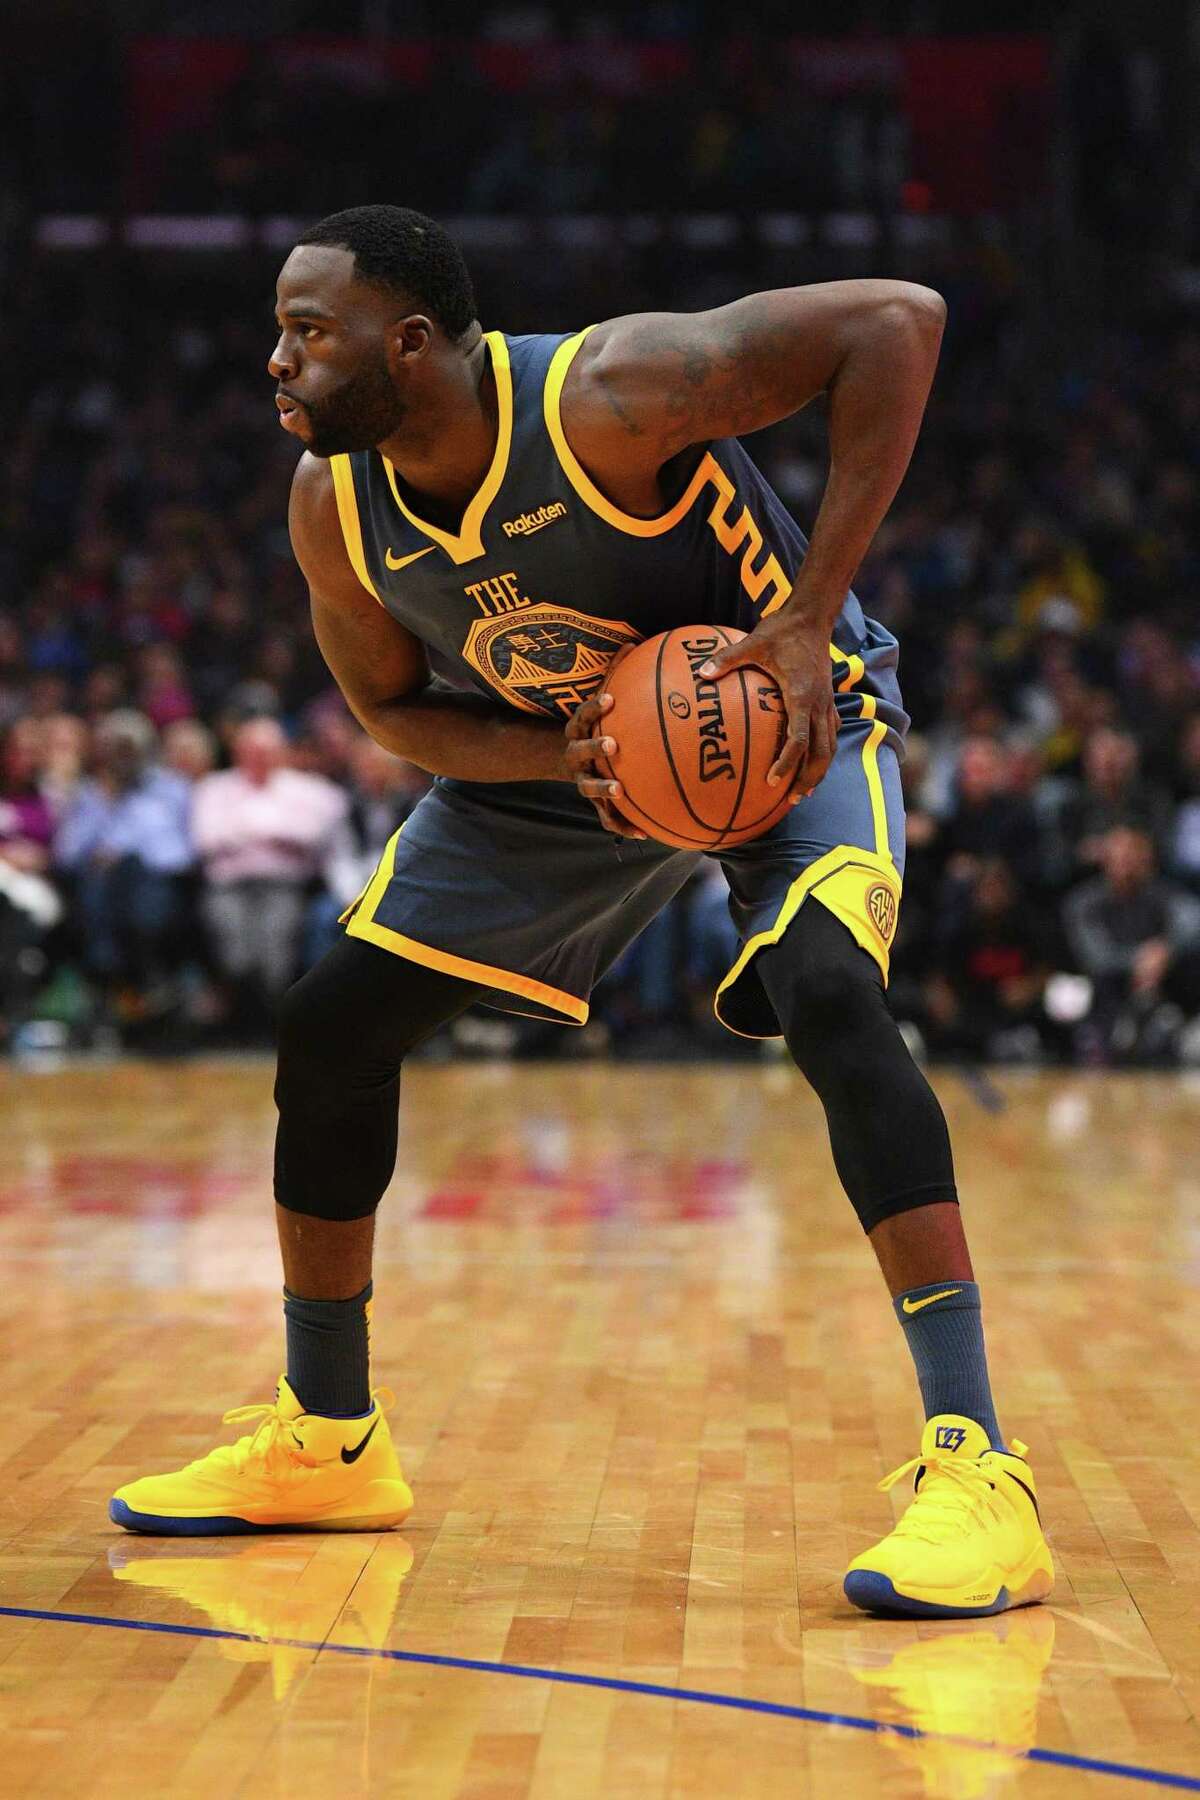 Golden State Warriors Forward Draymond Green (23) looks to make a pass during a NBA game between the Golden State Warriors and the Los Angeles Clippers on November 12, 2018 at STAPLES Center in Los Angeles, CA.